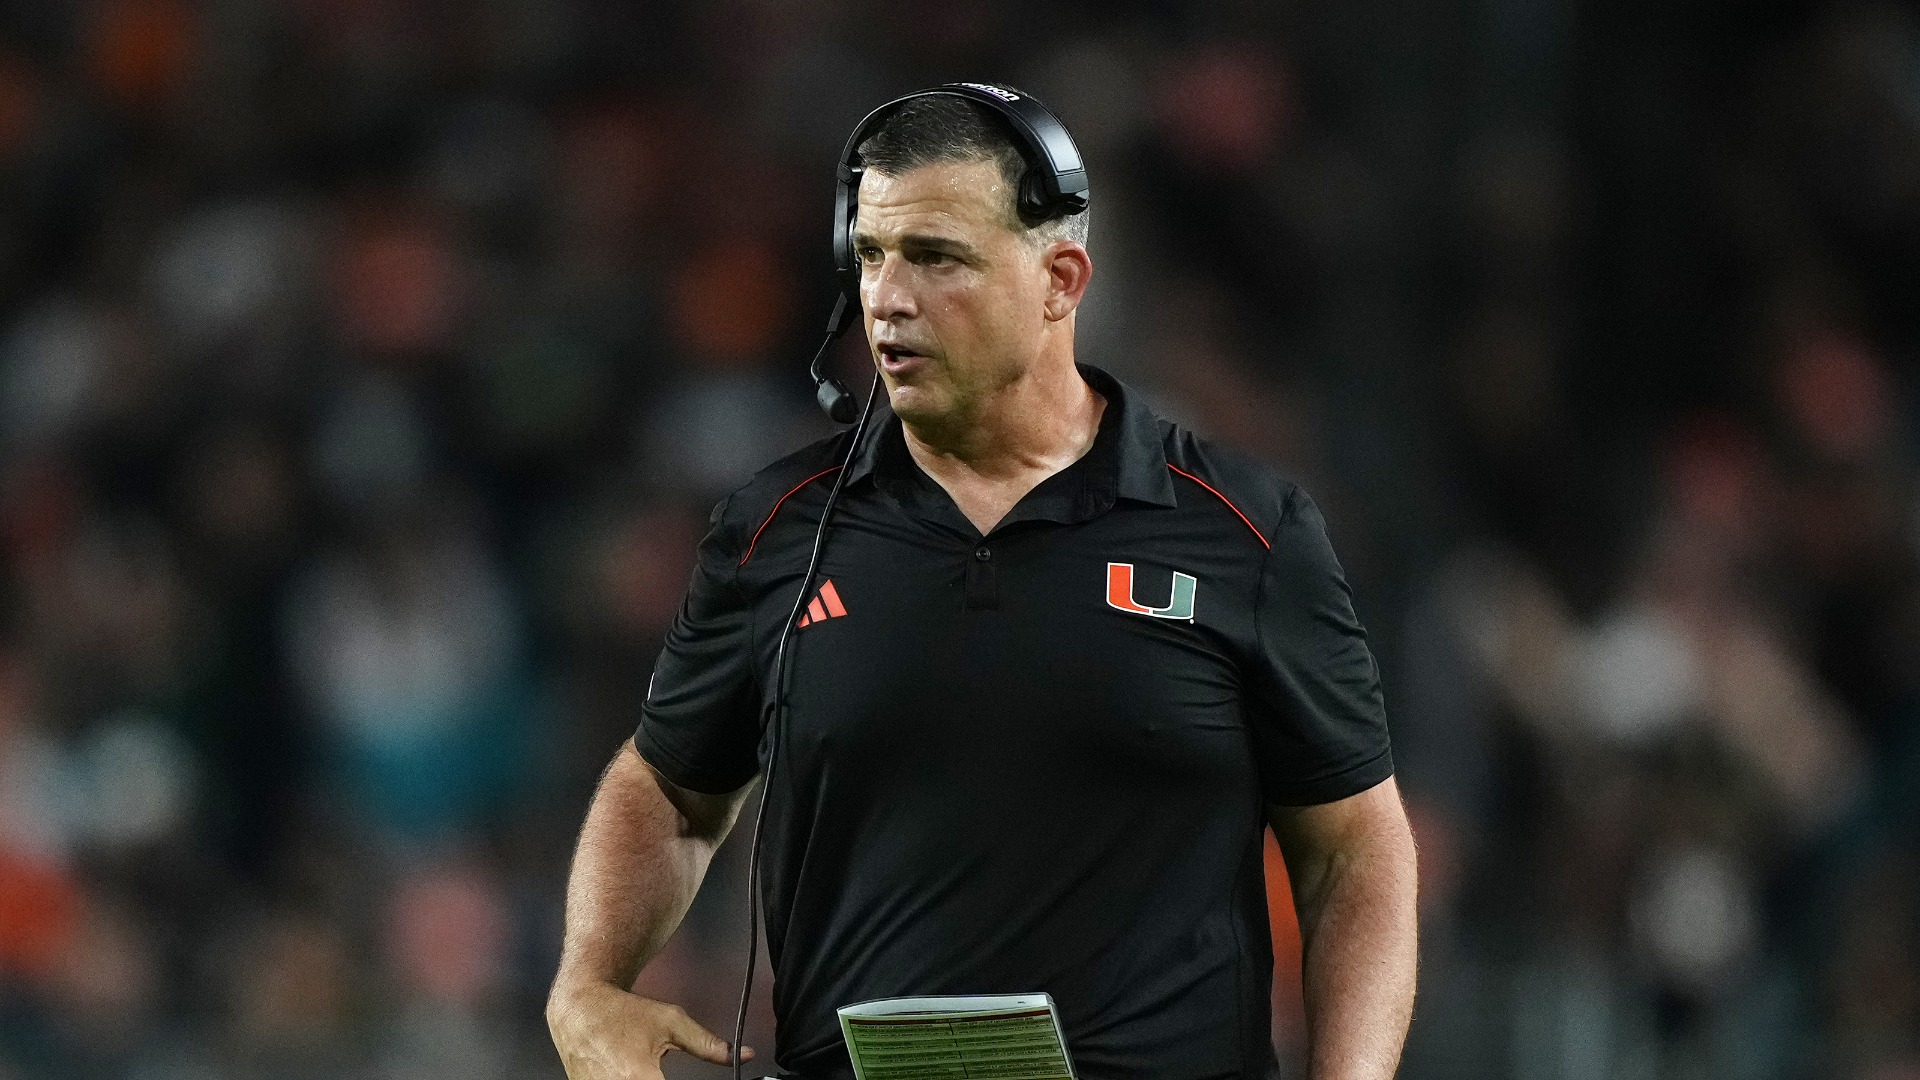 Hurricanes Coach Speaks Out After Miami-Georgia Tech Catastrophe